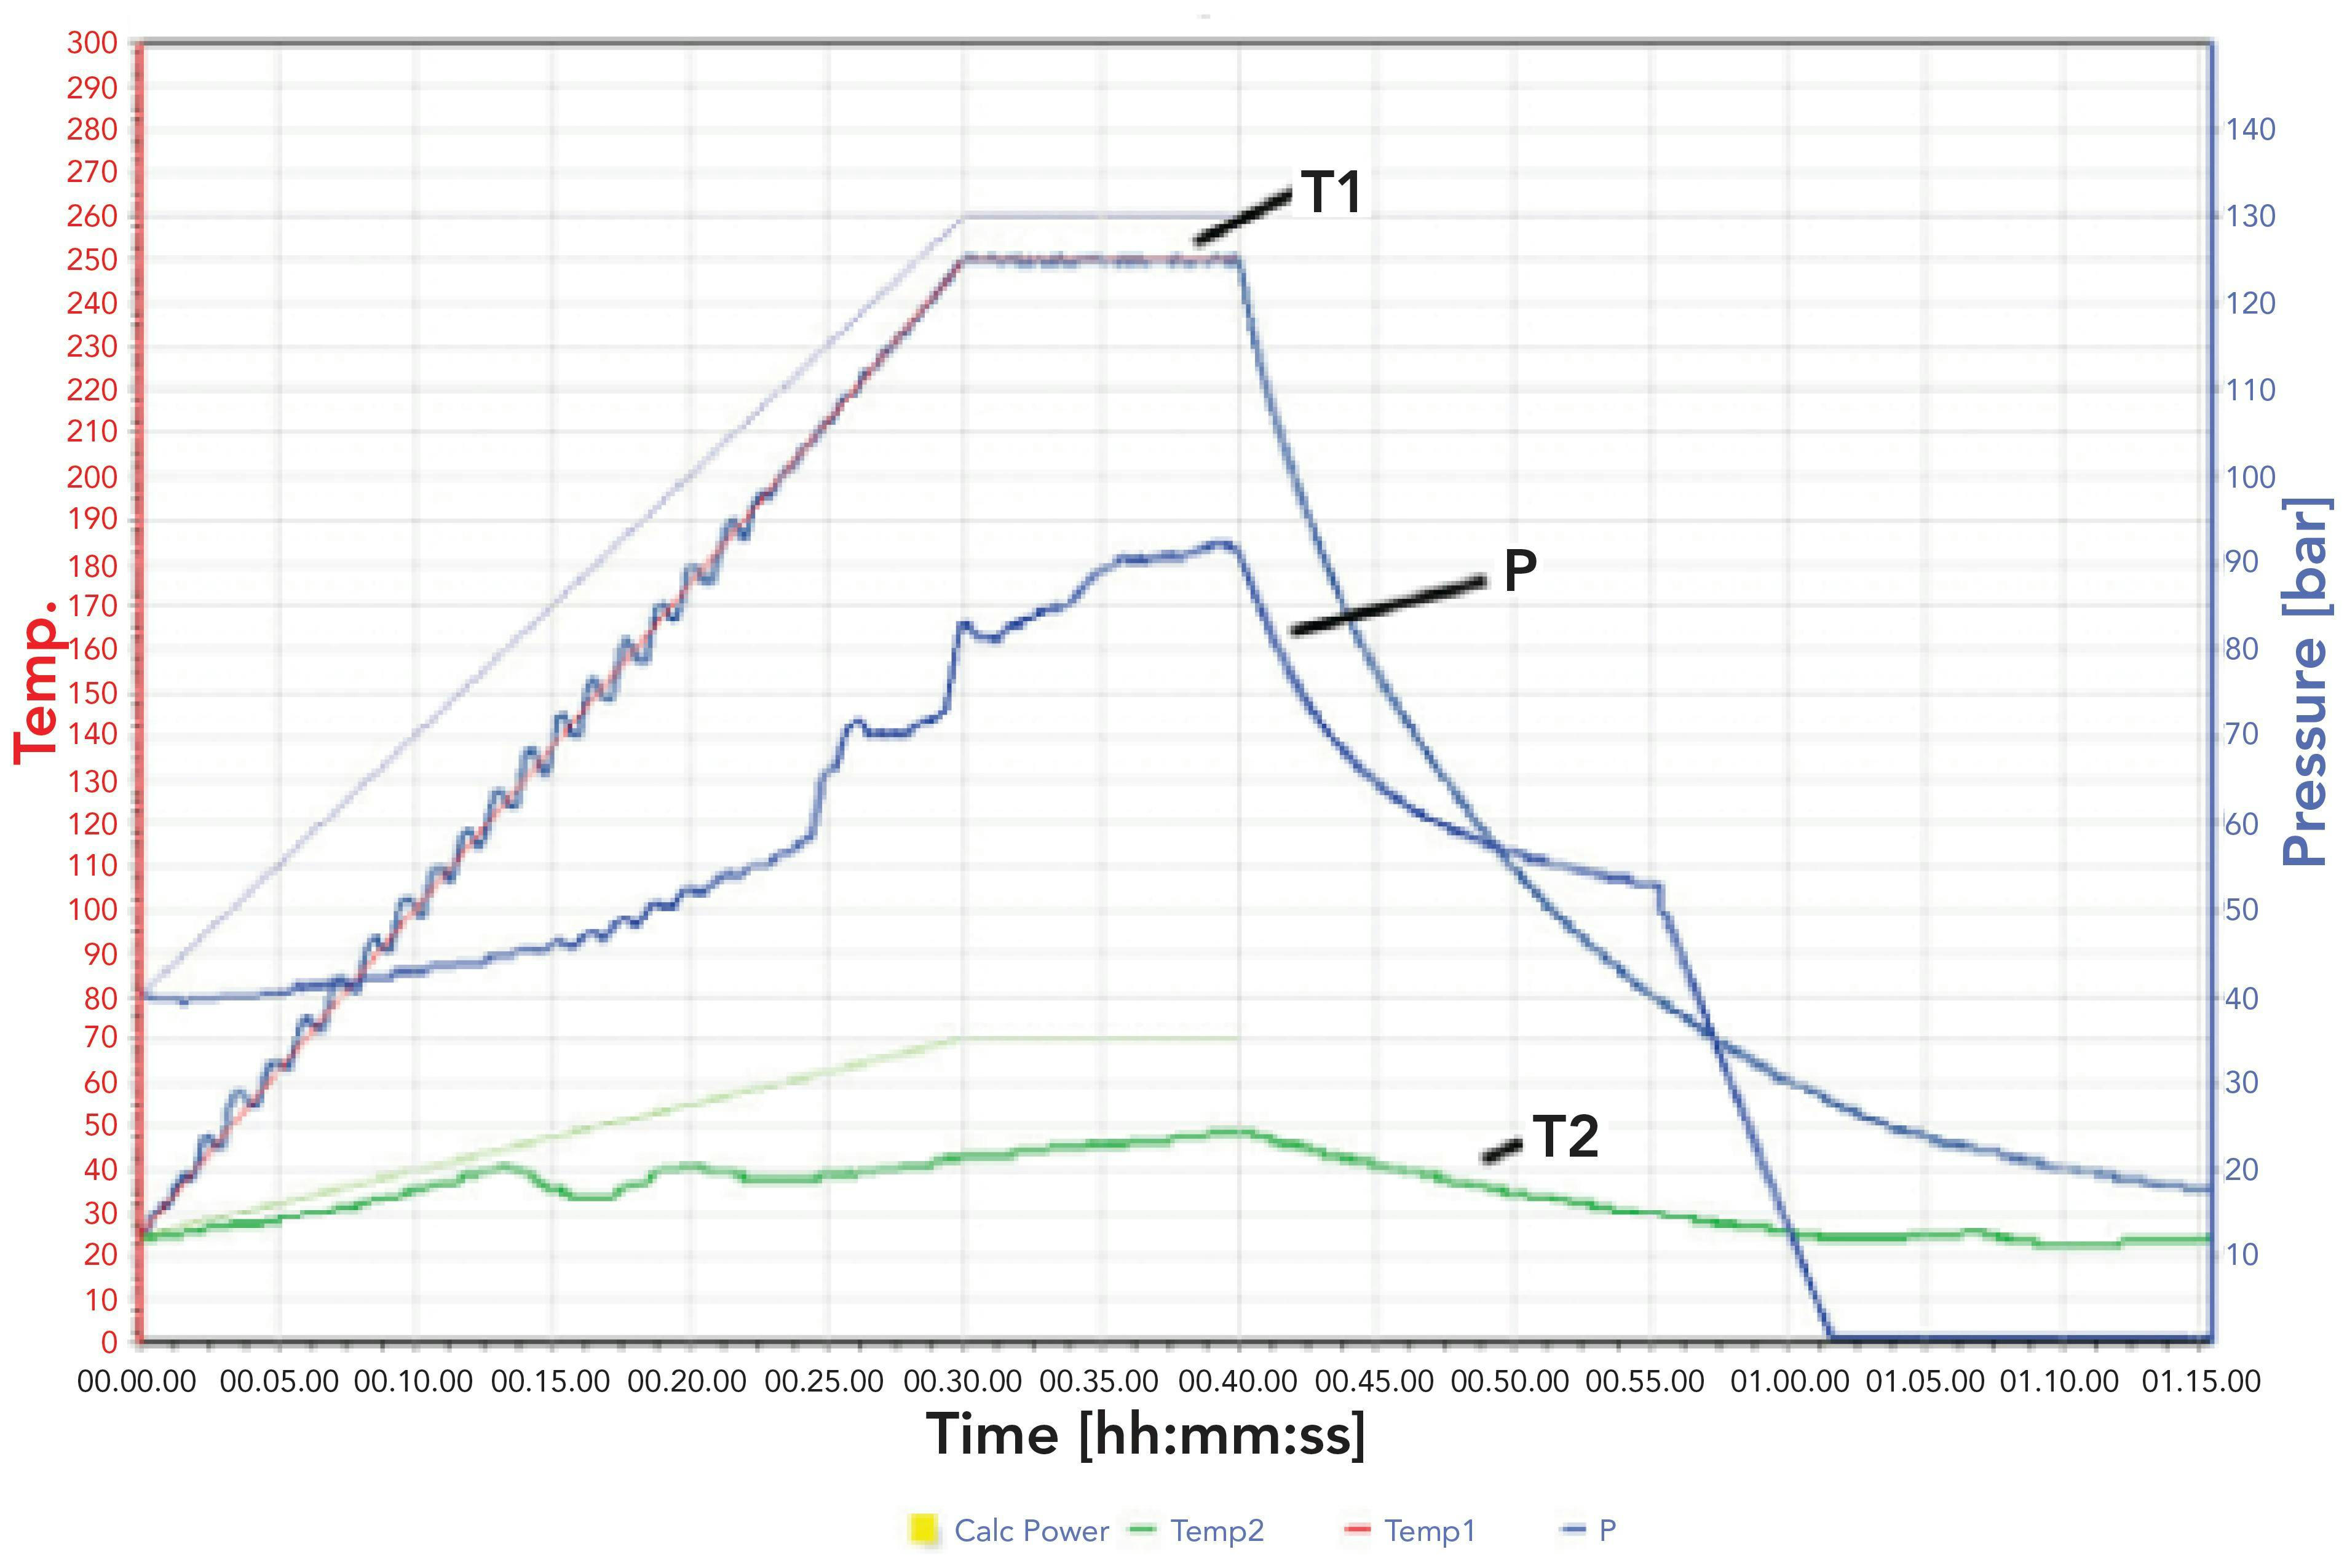 Figure 1: ultraWAVE digestion program with 5 x 0.75 g heavy oil: Ramp to 250 oC over 30 min and hold for 10 min. Line T1 shows the actual digestion temperature achieved. The applied microwave power is automatically controlled by the system, so the actual digestion temperature precisely follows the programmed temperature profile. The outer temperature of the reaction chamber is also monitored (T2). Note that pressure (P) reached almost 100 bar during the run. This is due to the high weight and high organic content of the samples, which generates NOx and CO2. Pressure was released automatically at 55 min.